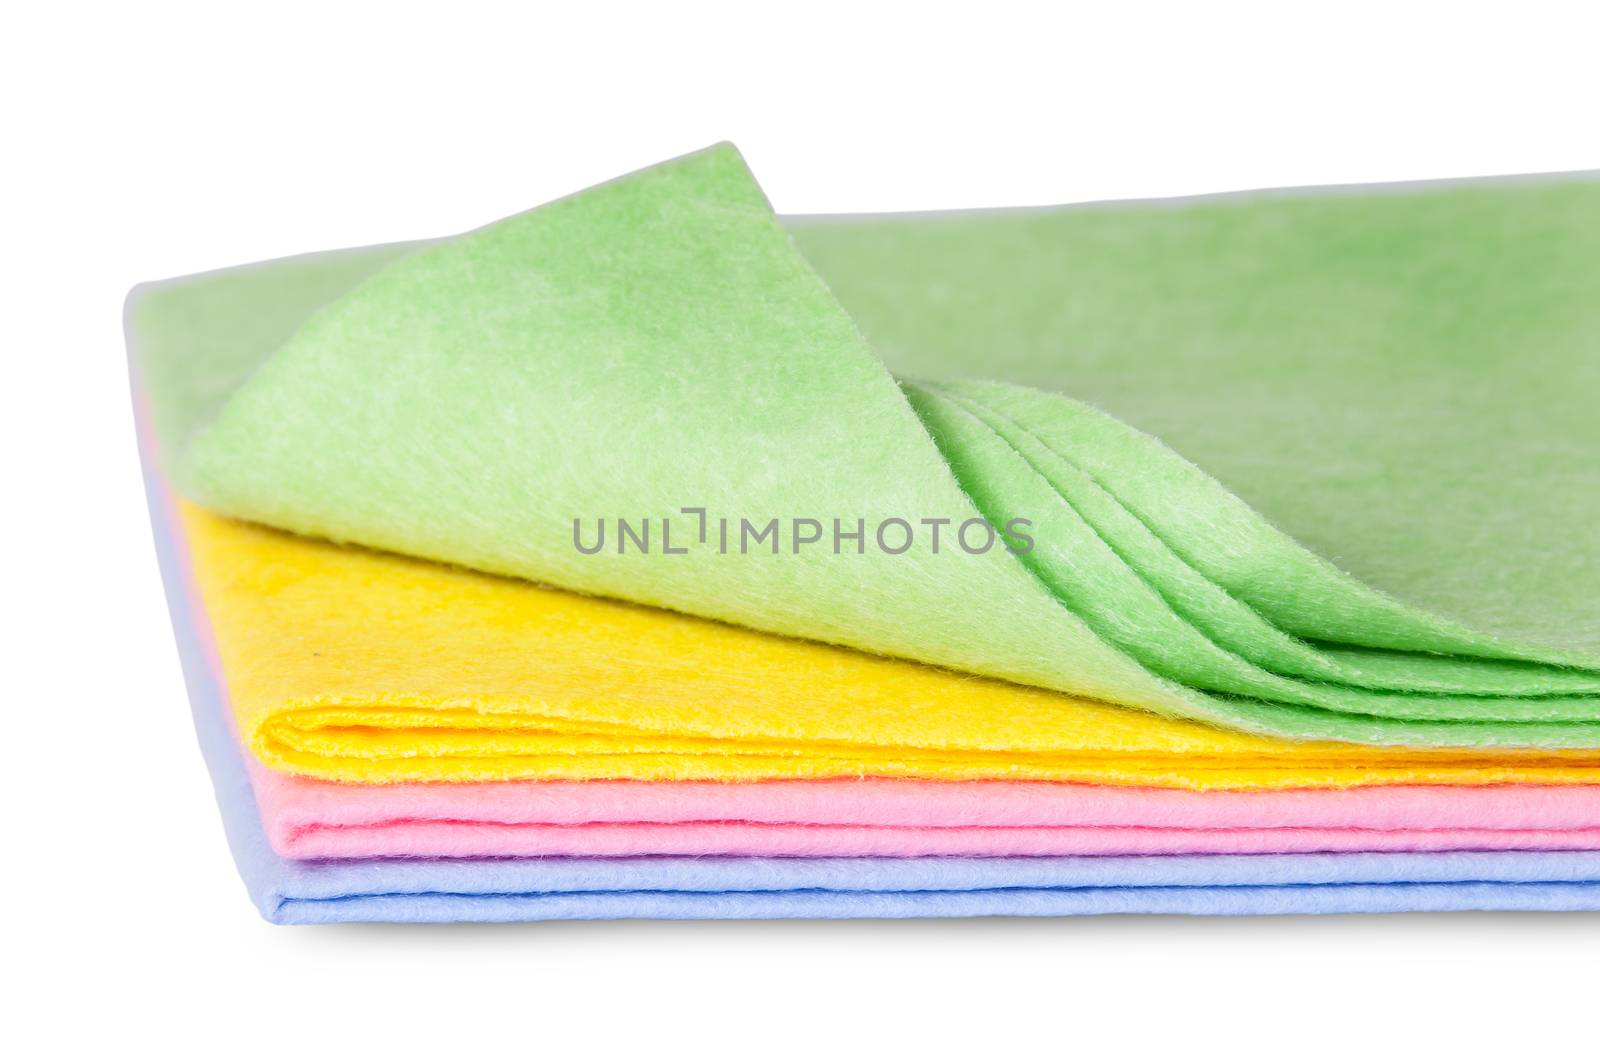 Multicolored cleaning cloths one folded front view isolated on white background